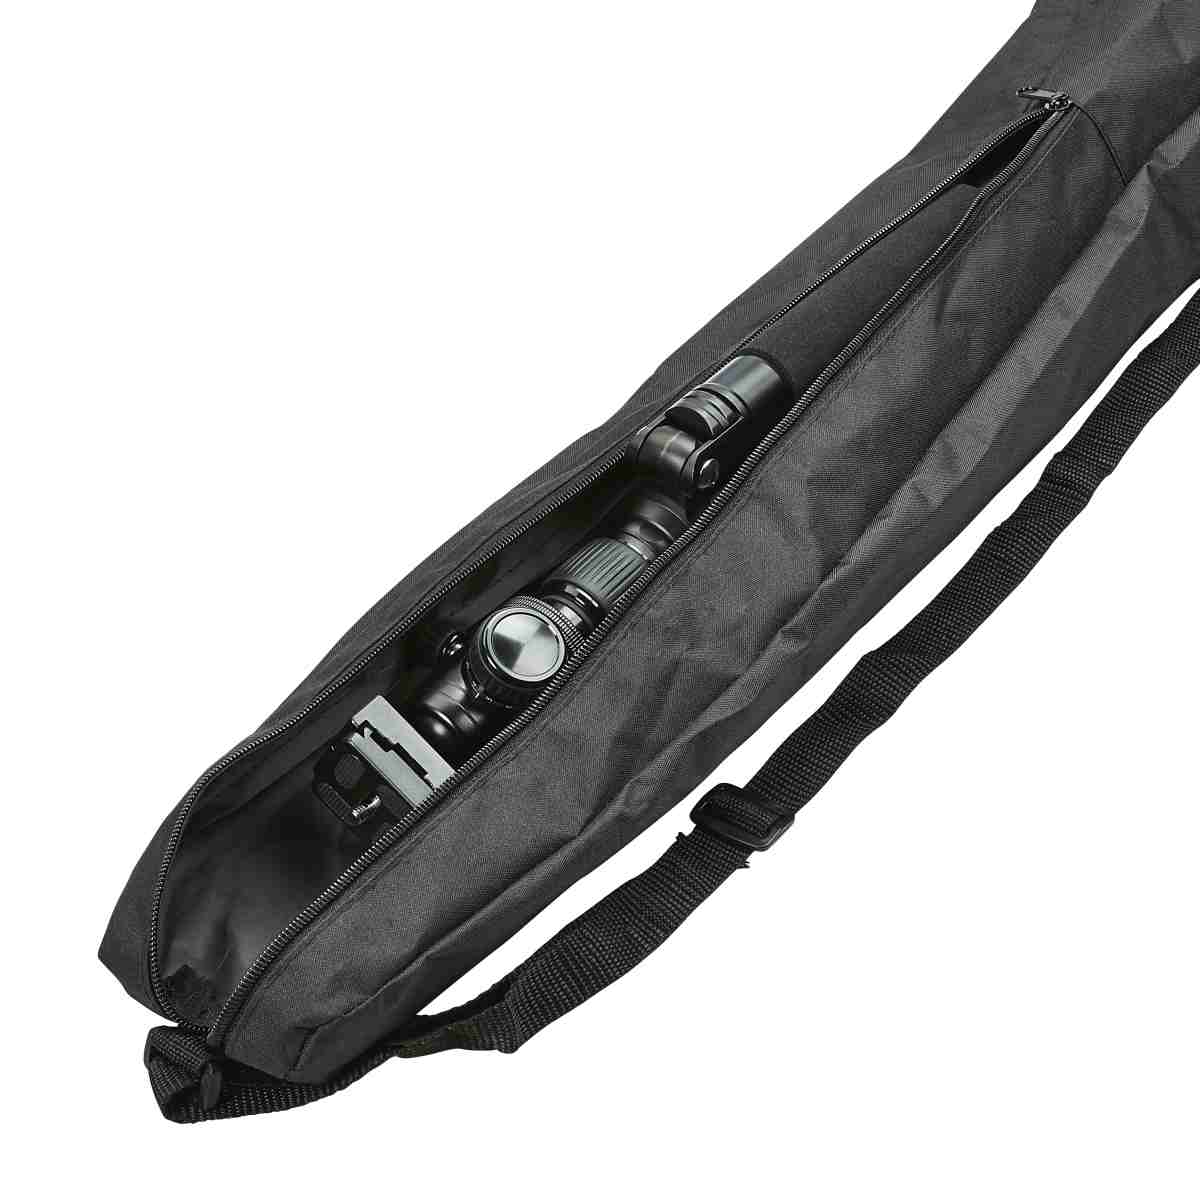 Walimex pro bag for WT 806